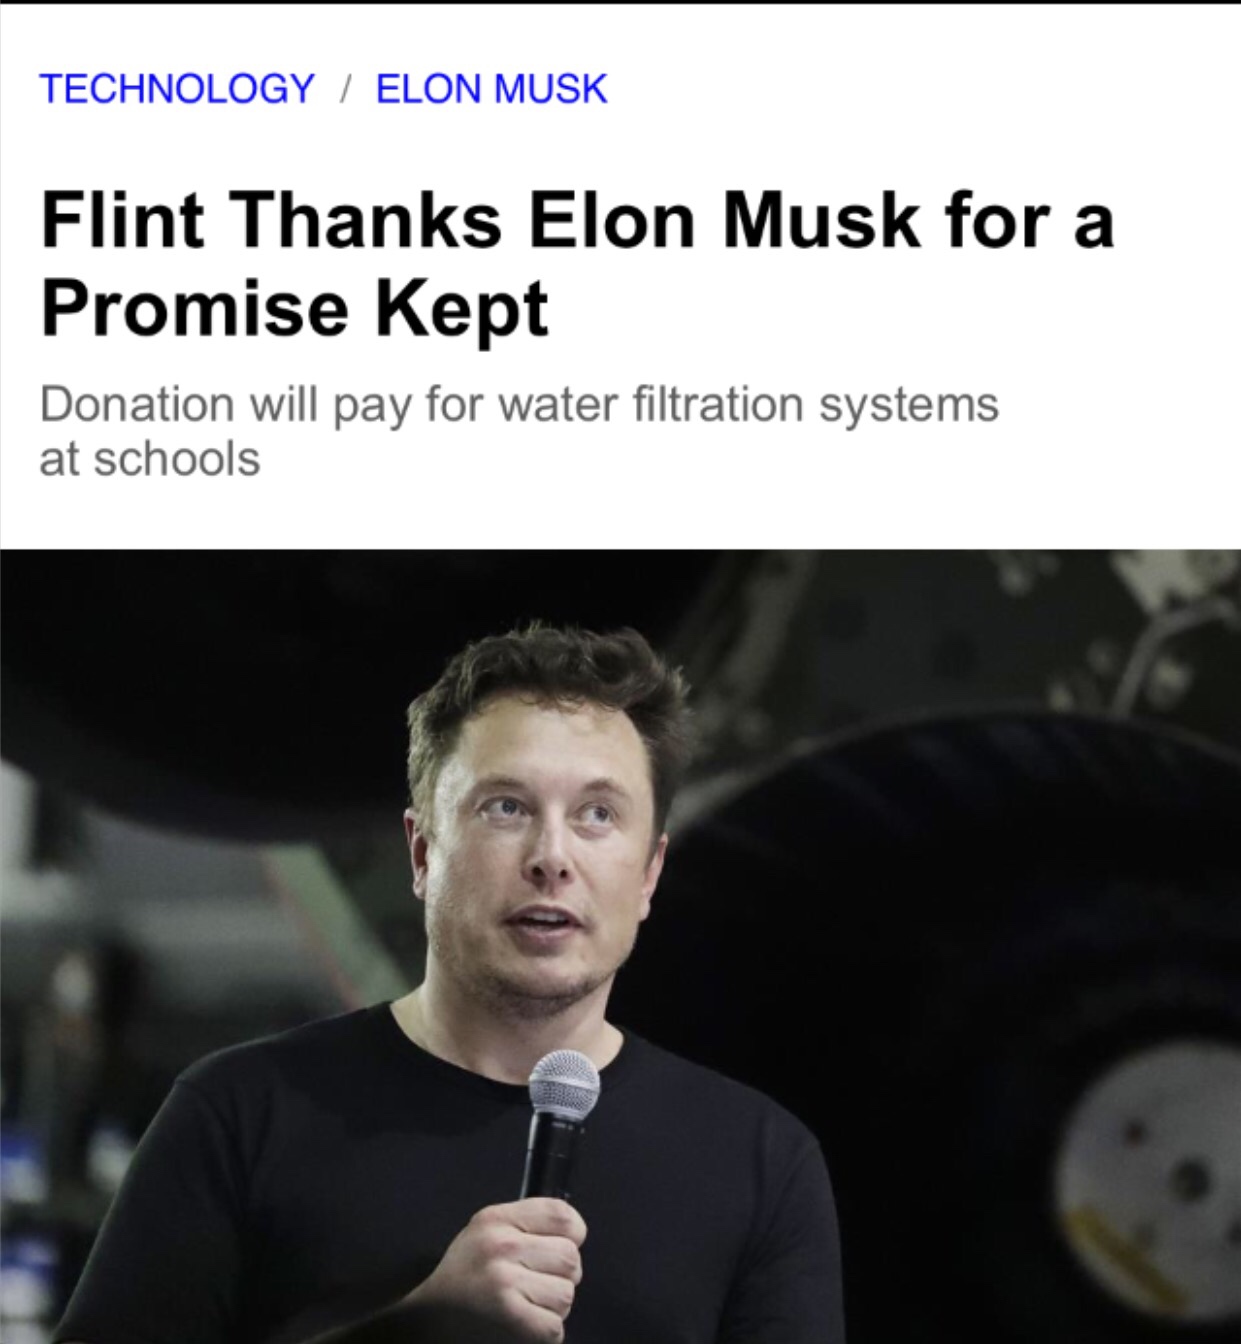 Elon Musk - Technology | Elon Musk Flint Thanks Elon Musk for a Promise Kept Donation will pay for water filtration systems at schools